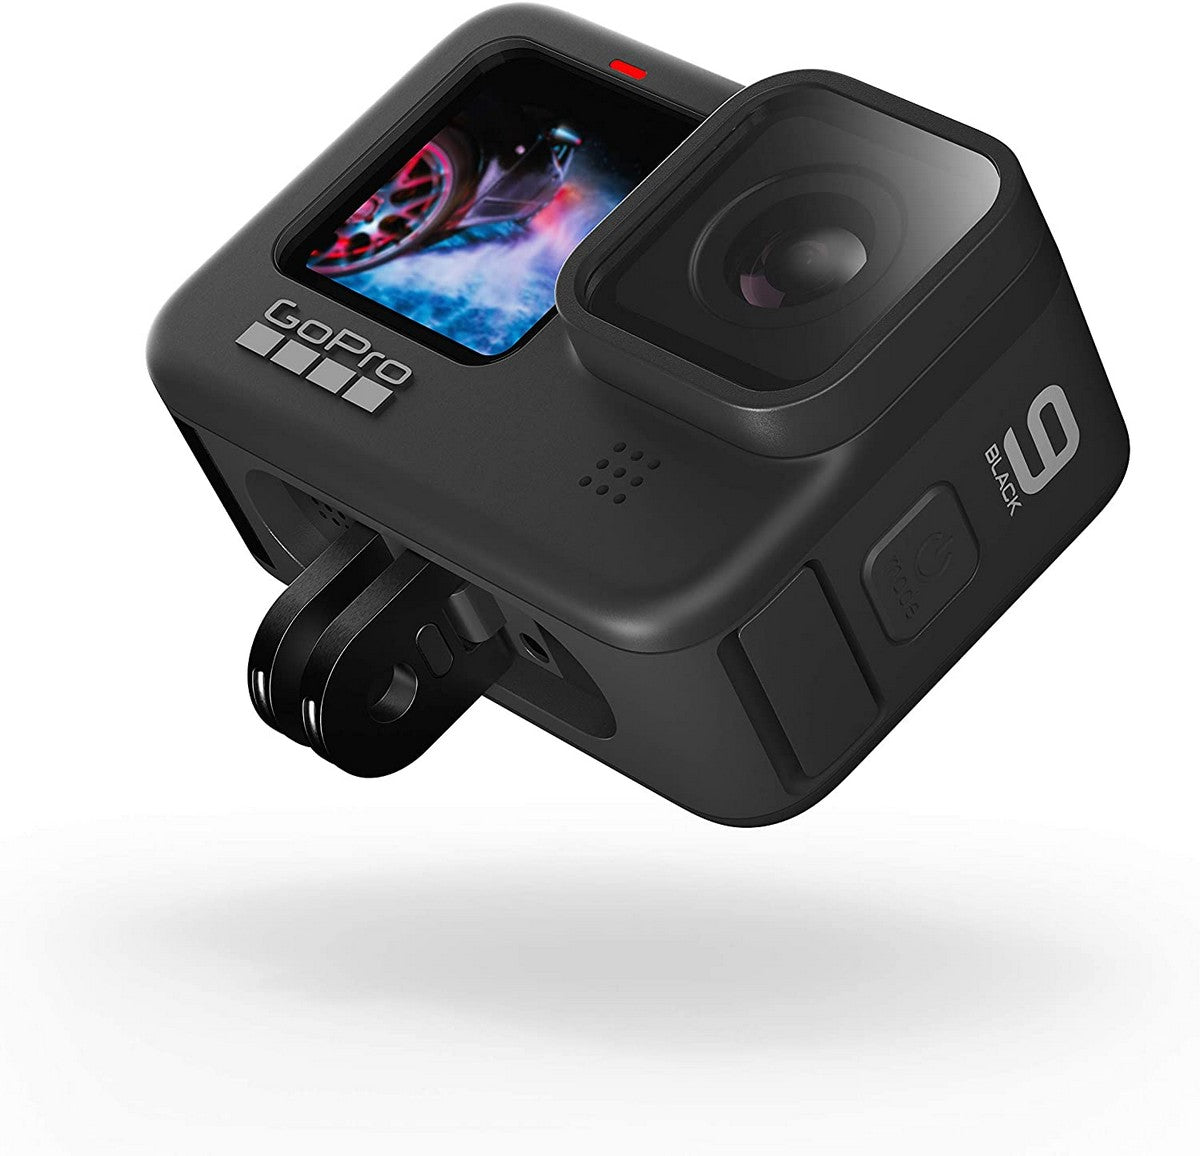 GoPro HERO9 Black - Waterproof Action Camera with Front LCD and Touch